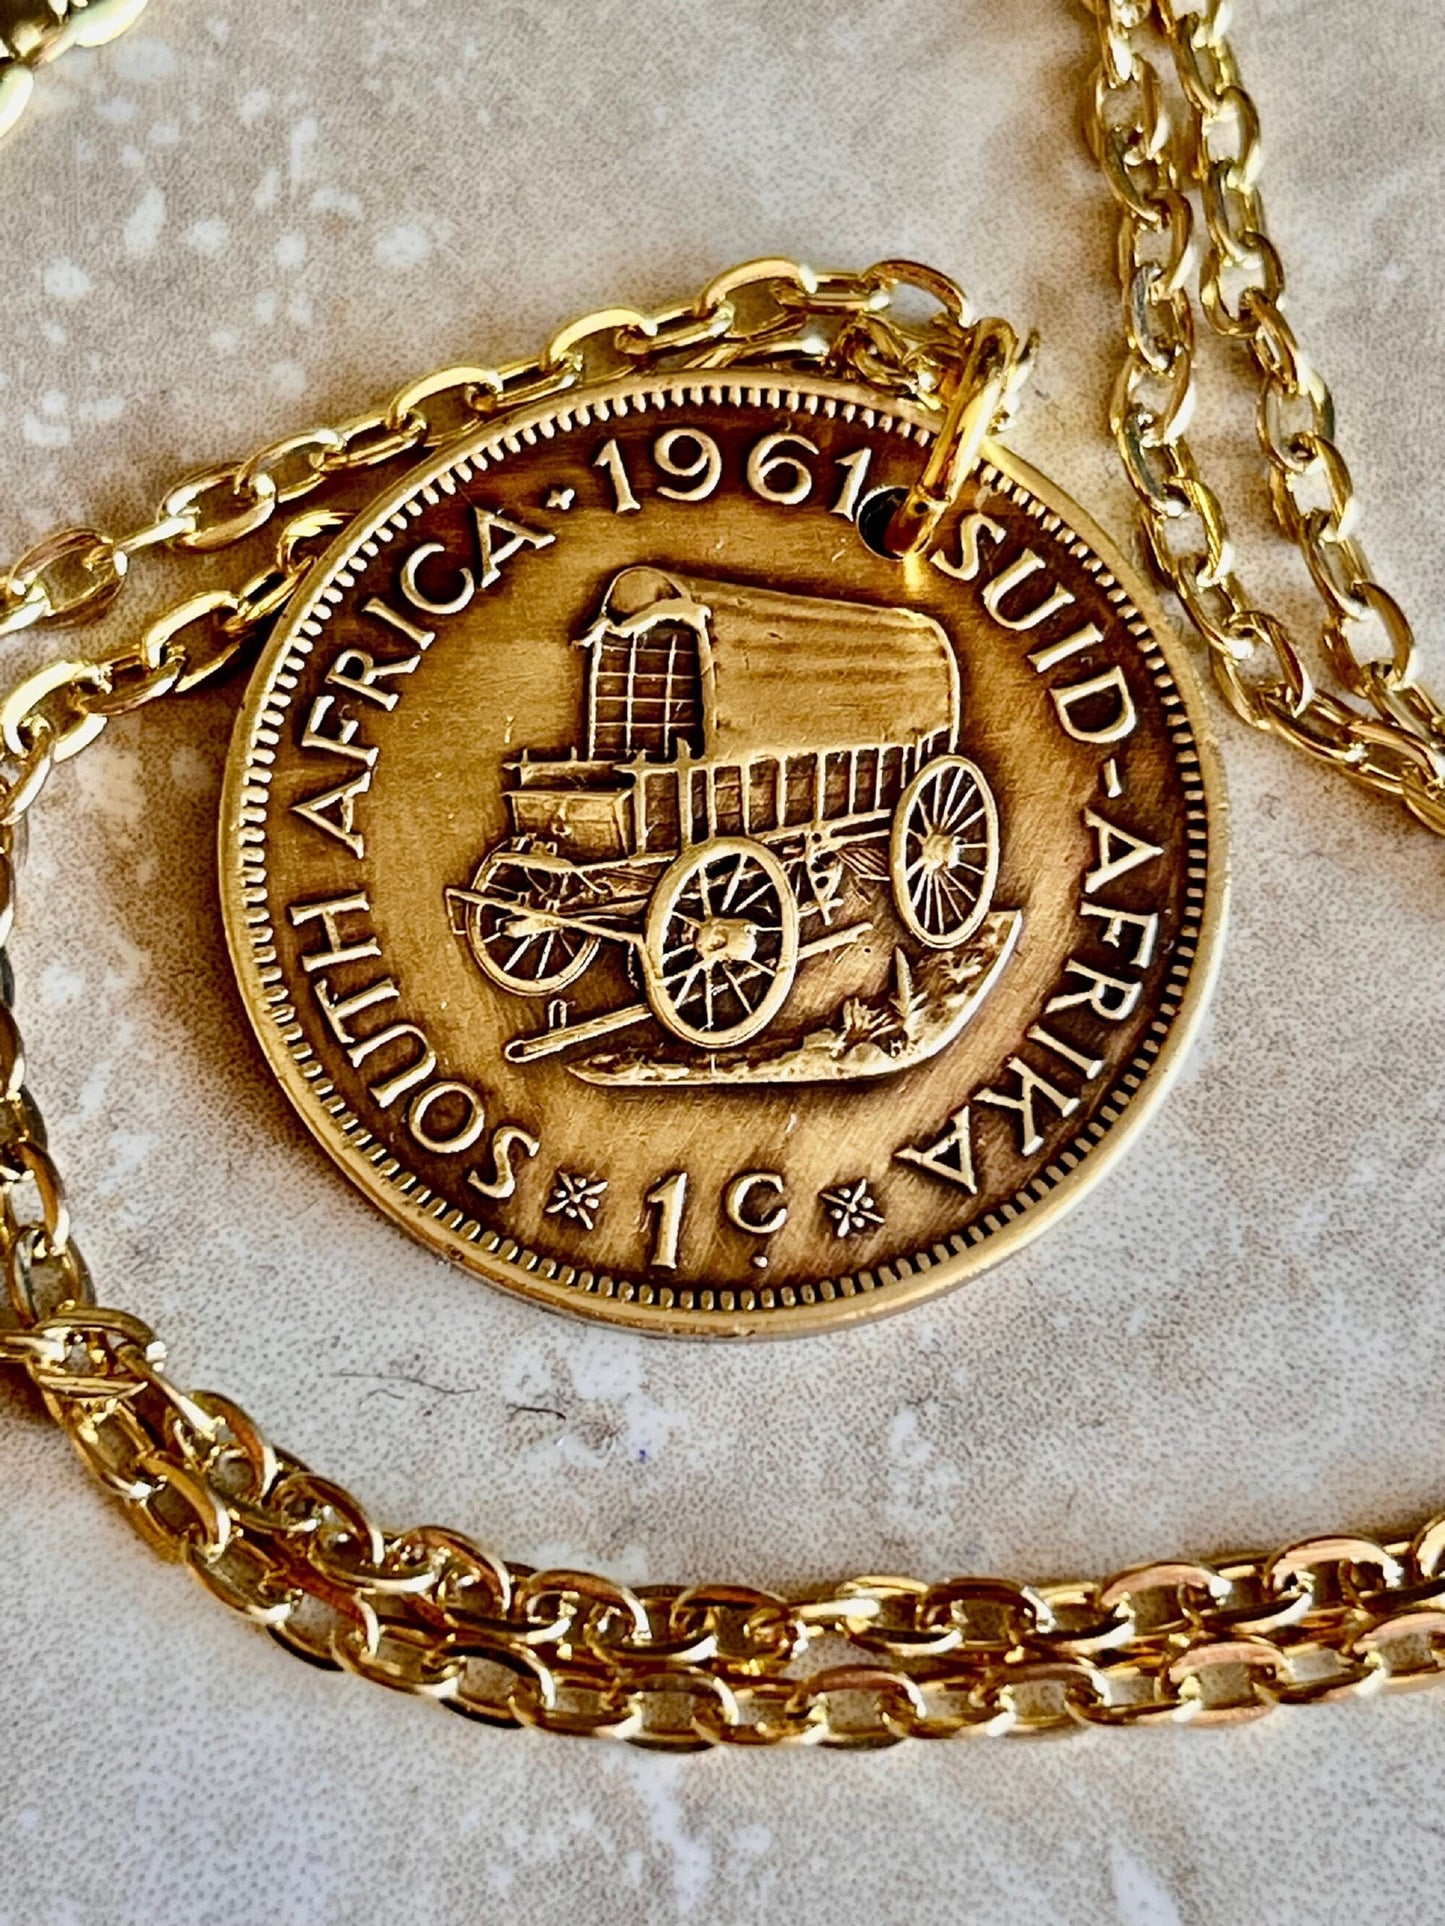 South Africa 1 Cent Coin Africka Pendant Personal Necklace Old Vintage Handmade Jewelry Gift Friend Charm For Him Her World Coin Collector